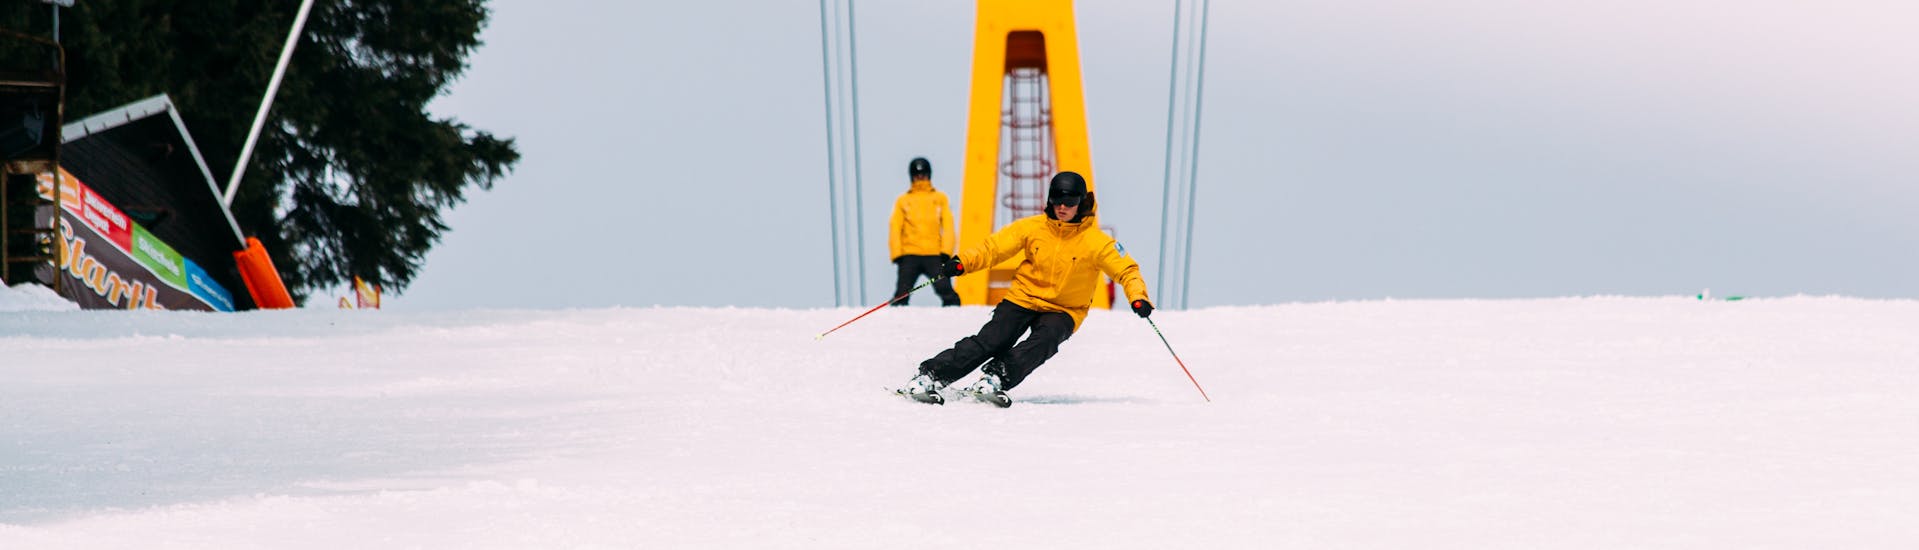 A skier is skiing down a slope at Adult Ski Lessons for All Levels.